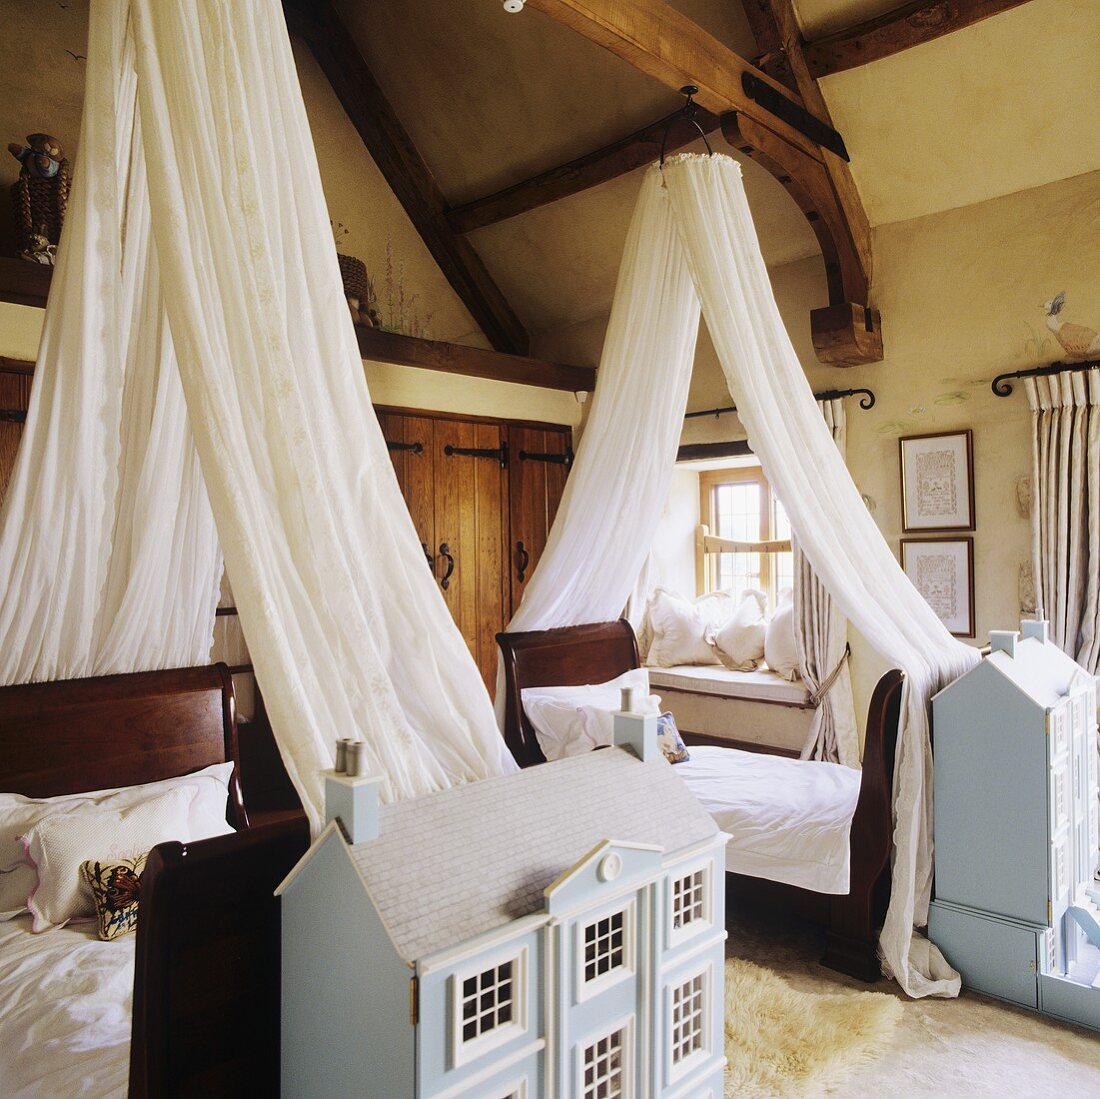 Single beds with white canopies and architectural models in a rustic bedroom